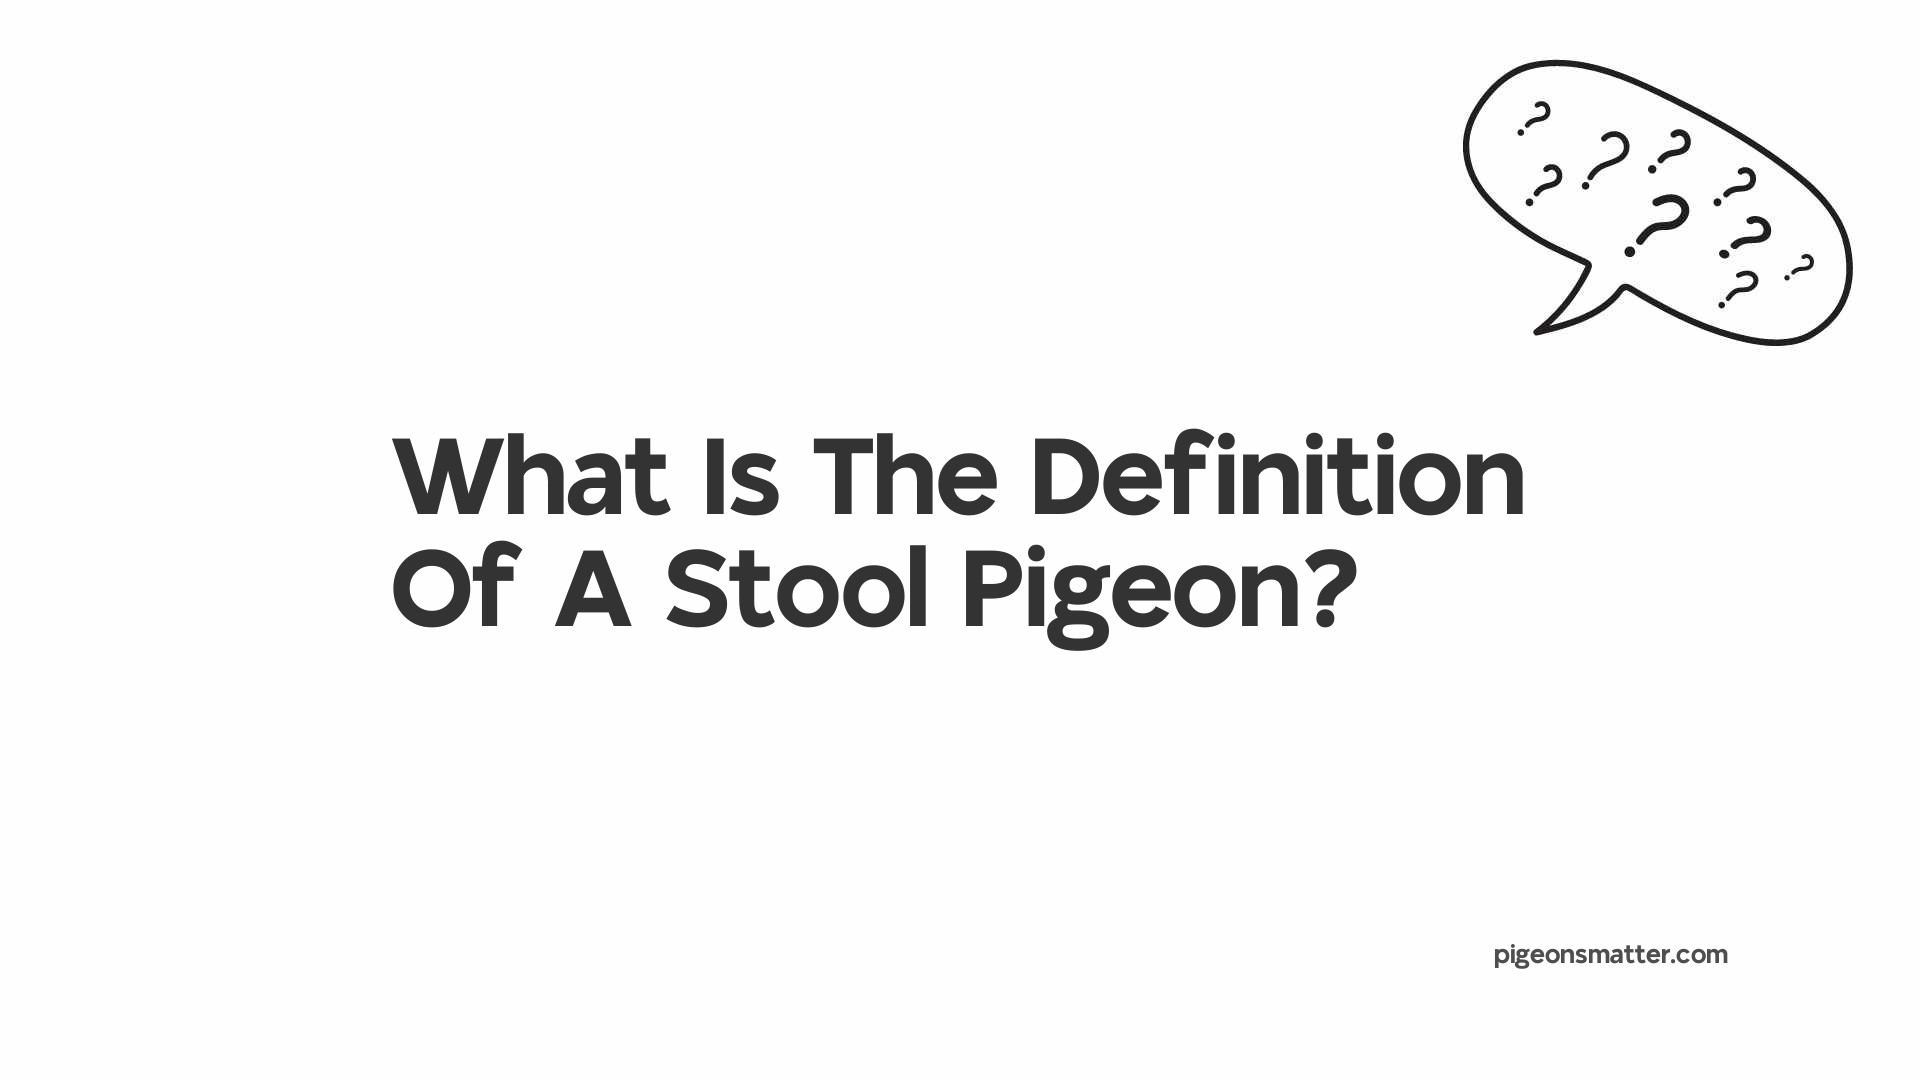 What Is The Definition Of A Stool Pigeon?